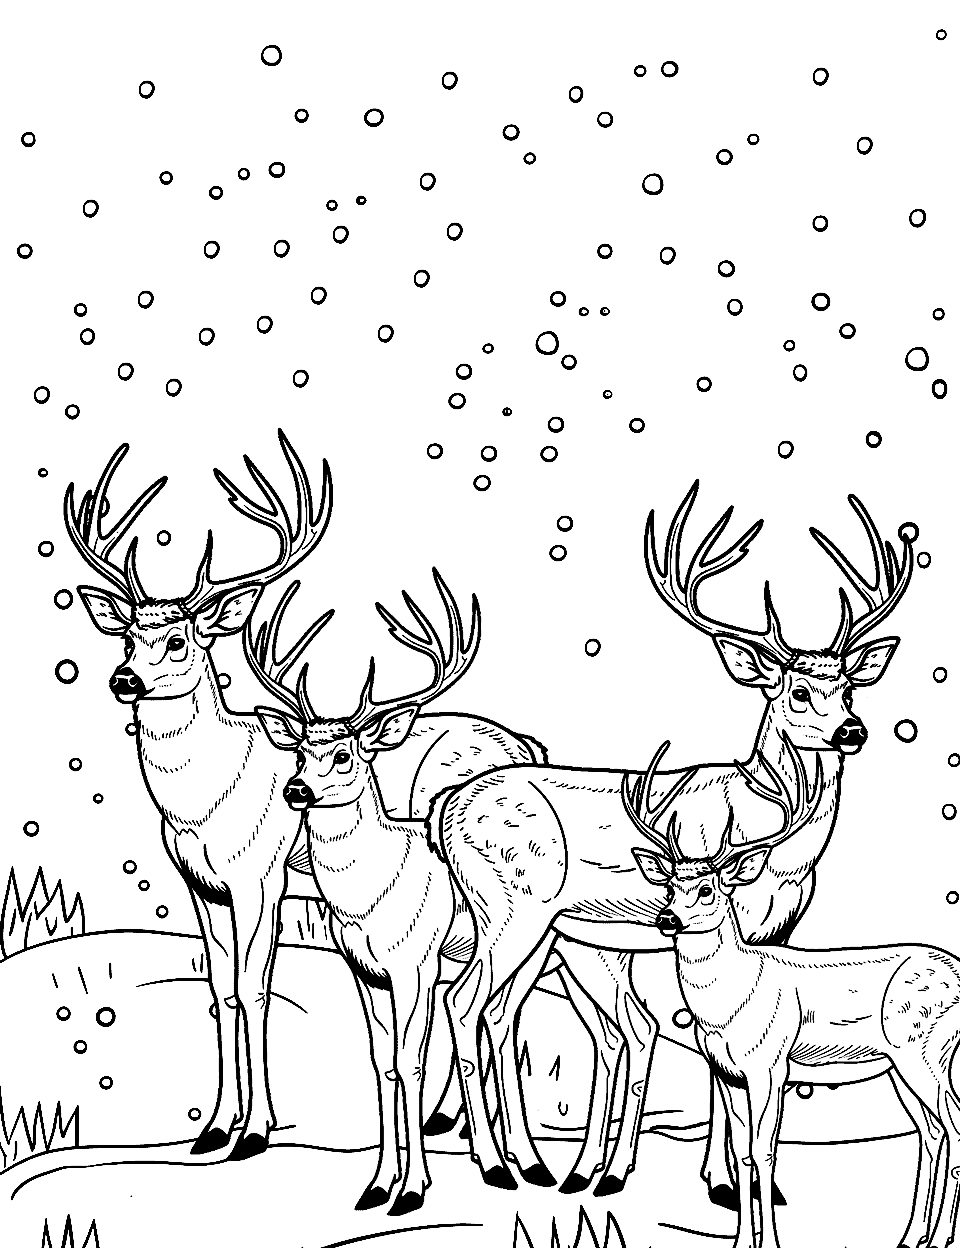 Winter Deer Family Gathering Coloring Page - A group of deer huddled together in a snowy landscape for warmth.